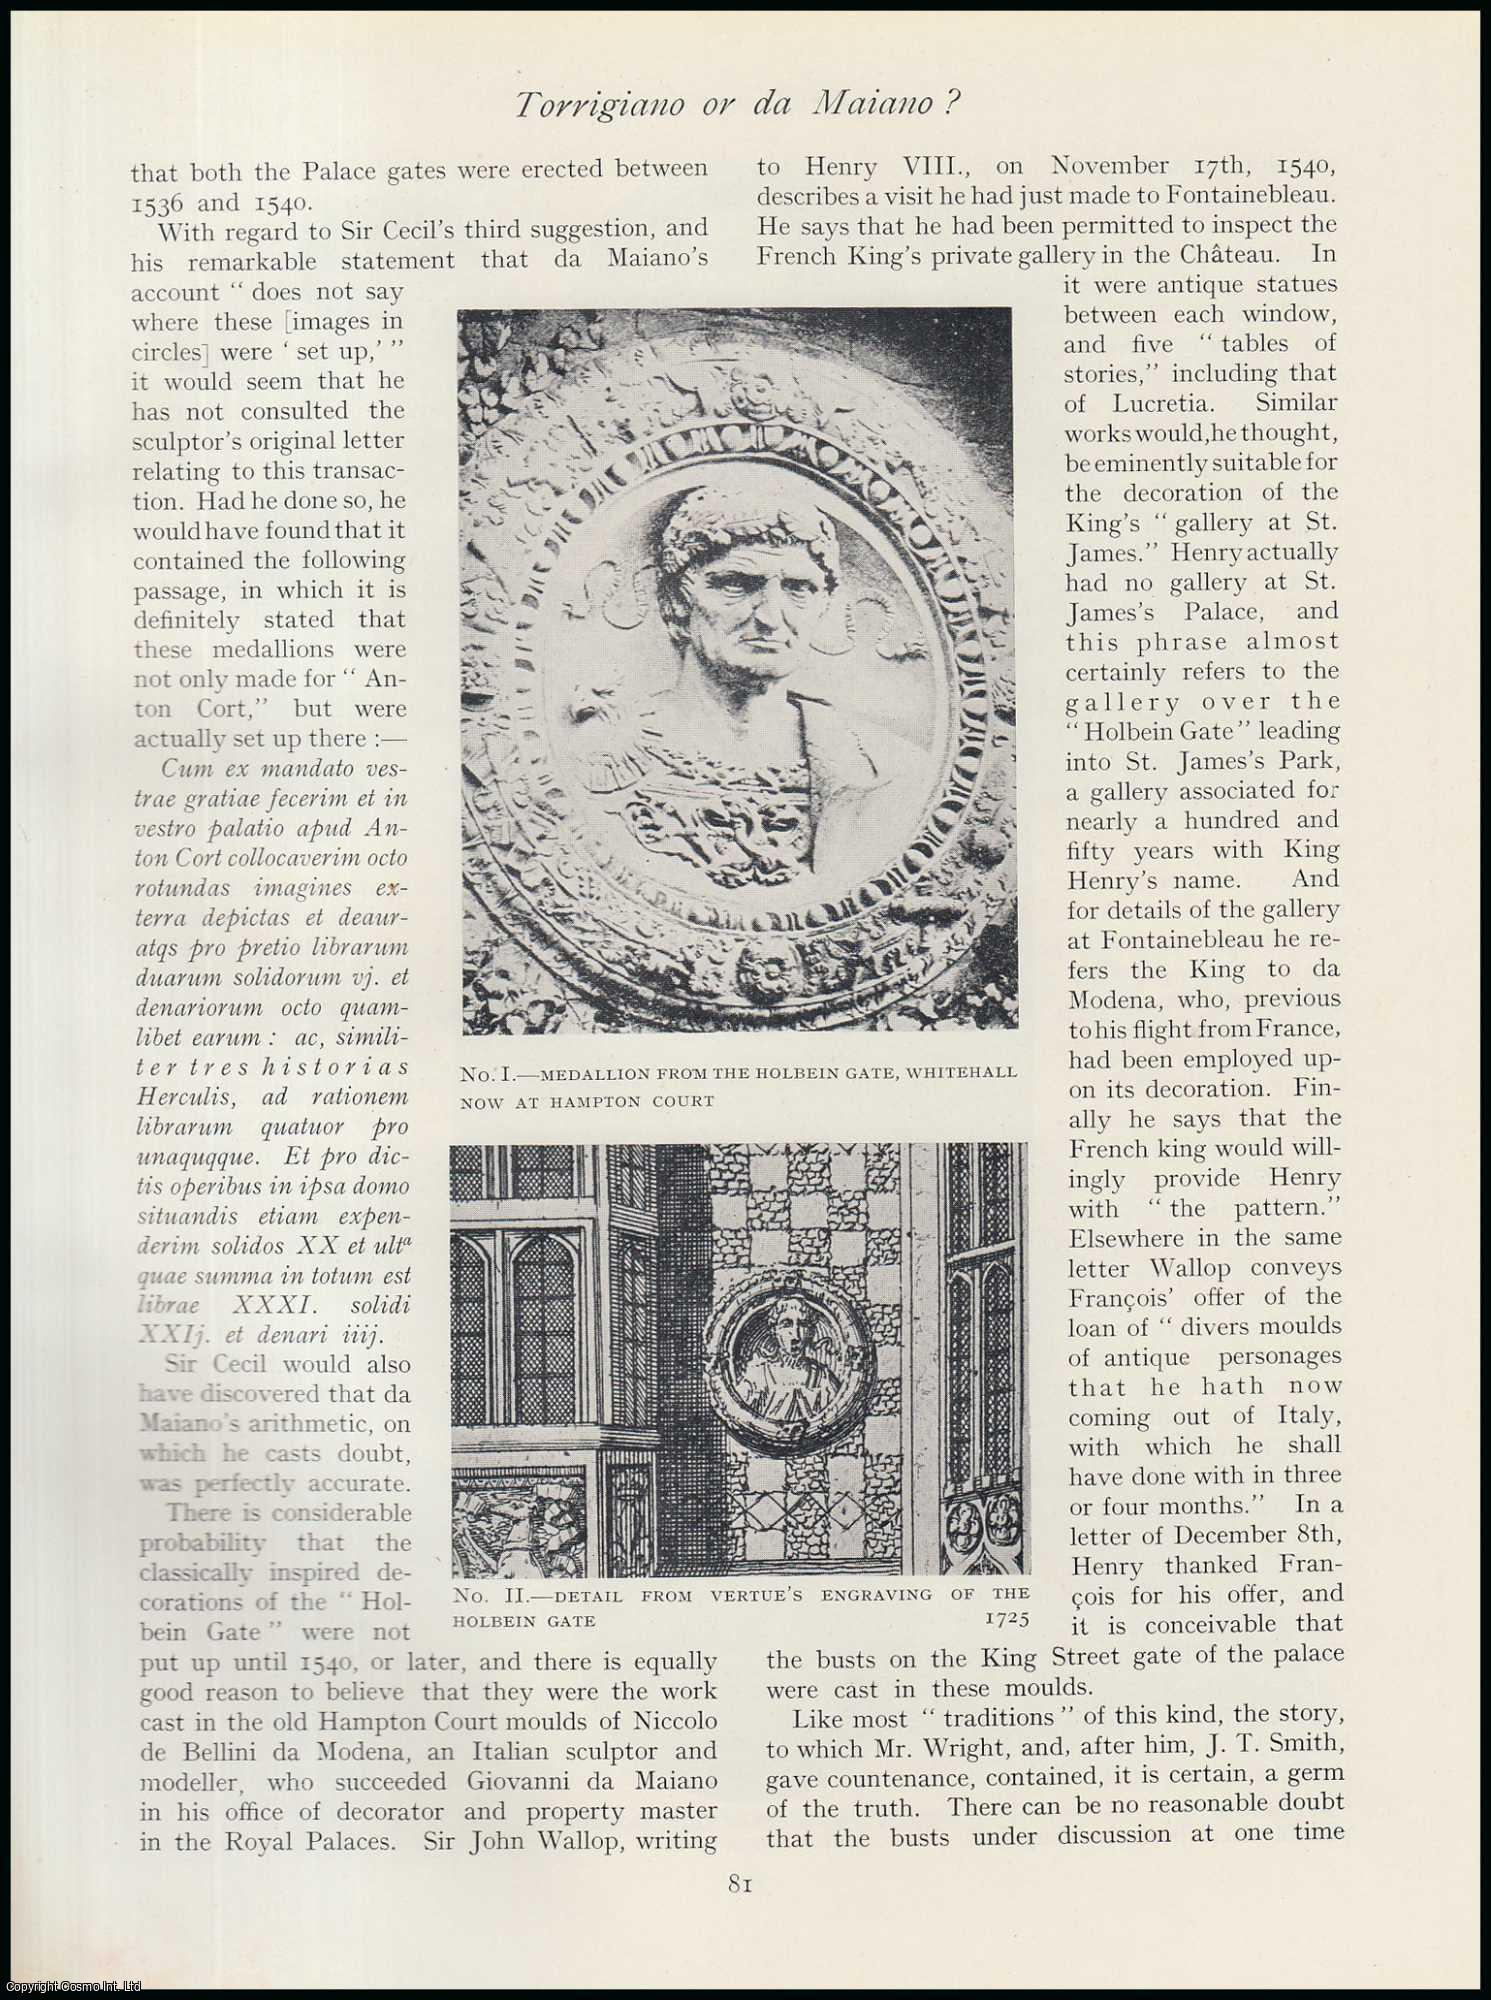 Charles R. Beard - Pietro Torrigiano or Benedetto da Maiano : Sculptors. An original article from The Connoisseur, 1929.